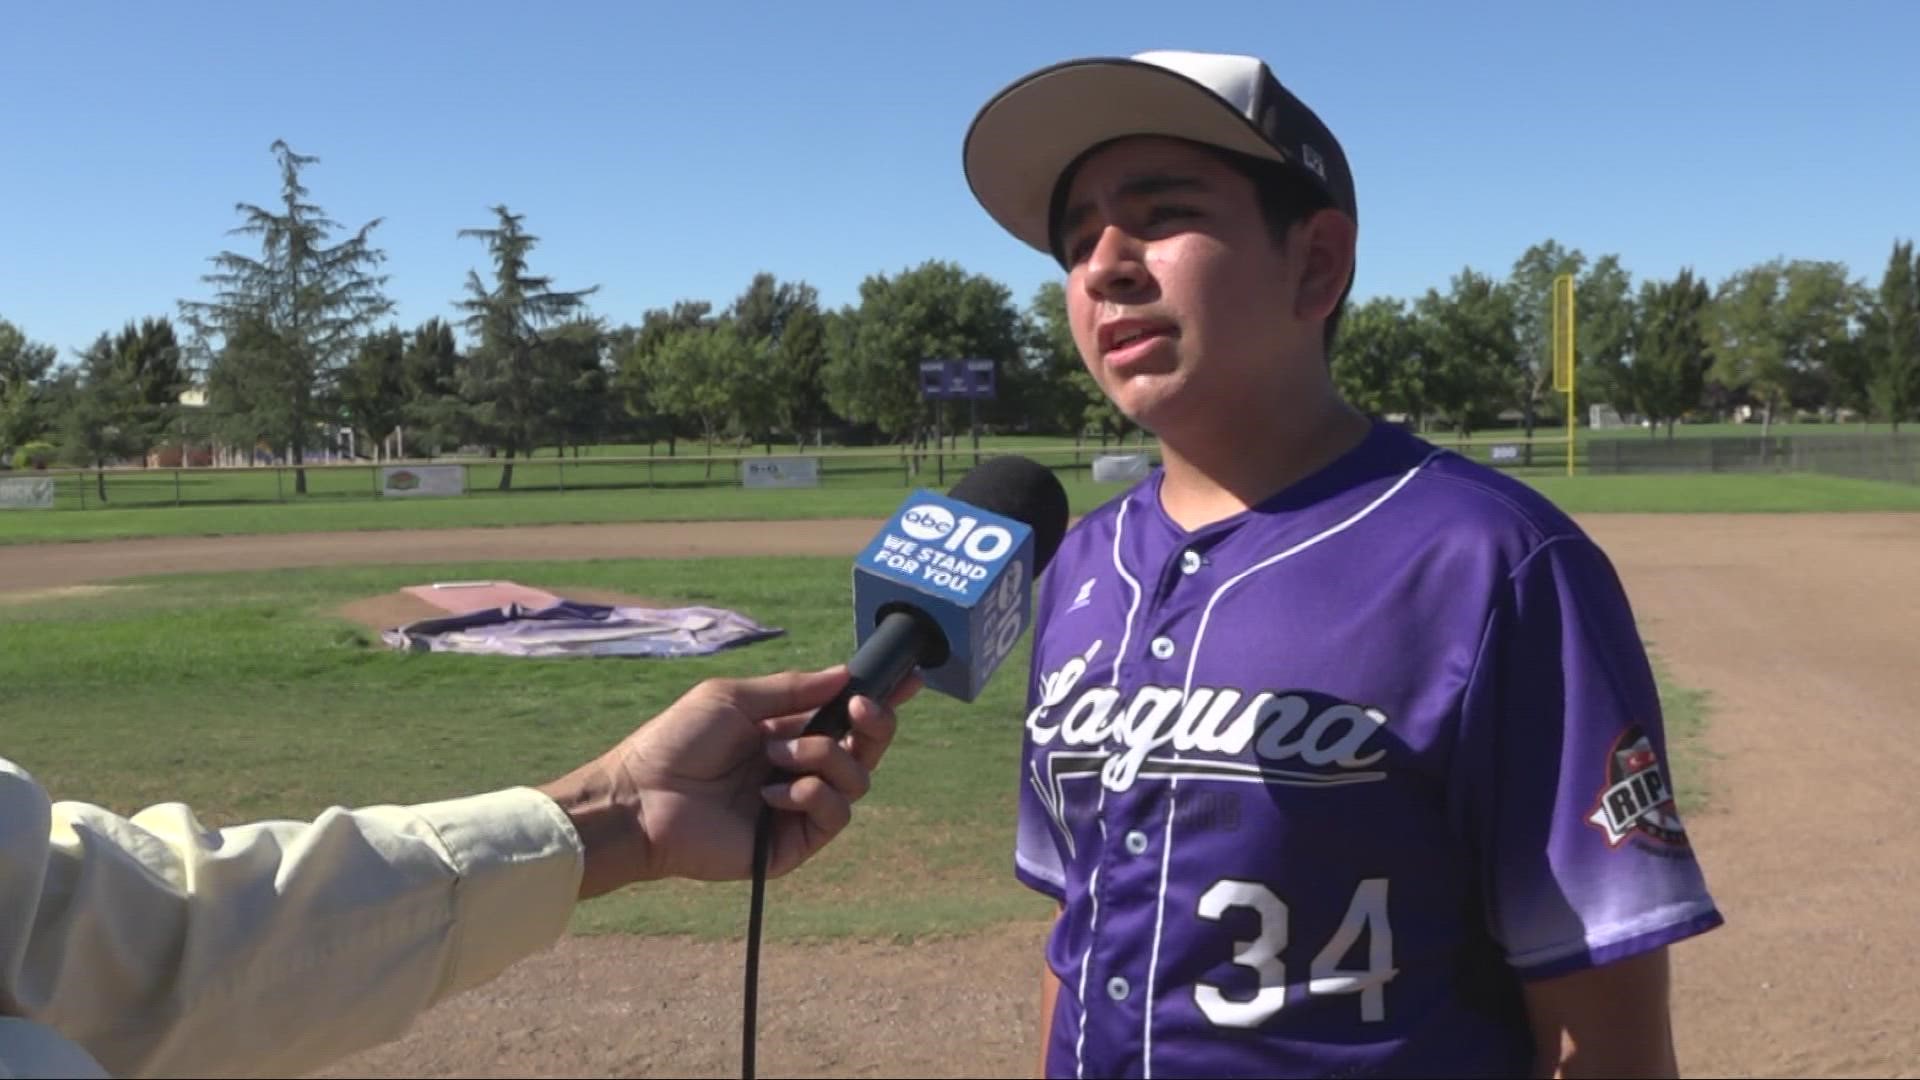 Elk Grove student Jacob Trujillo is an overachiever in the classroom and on the field. The teenager pitched a perfect game at the Cal Ripken World Series.